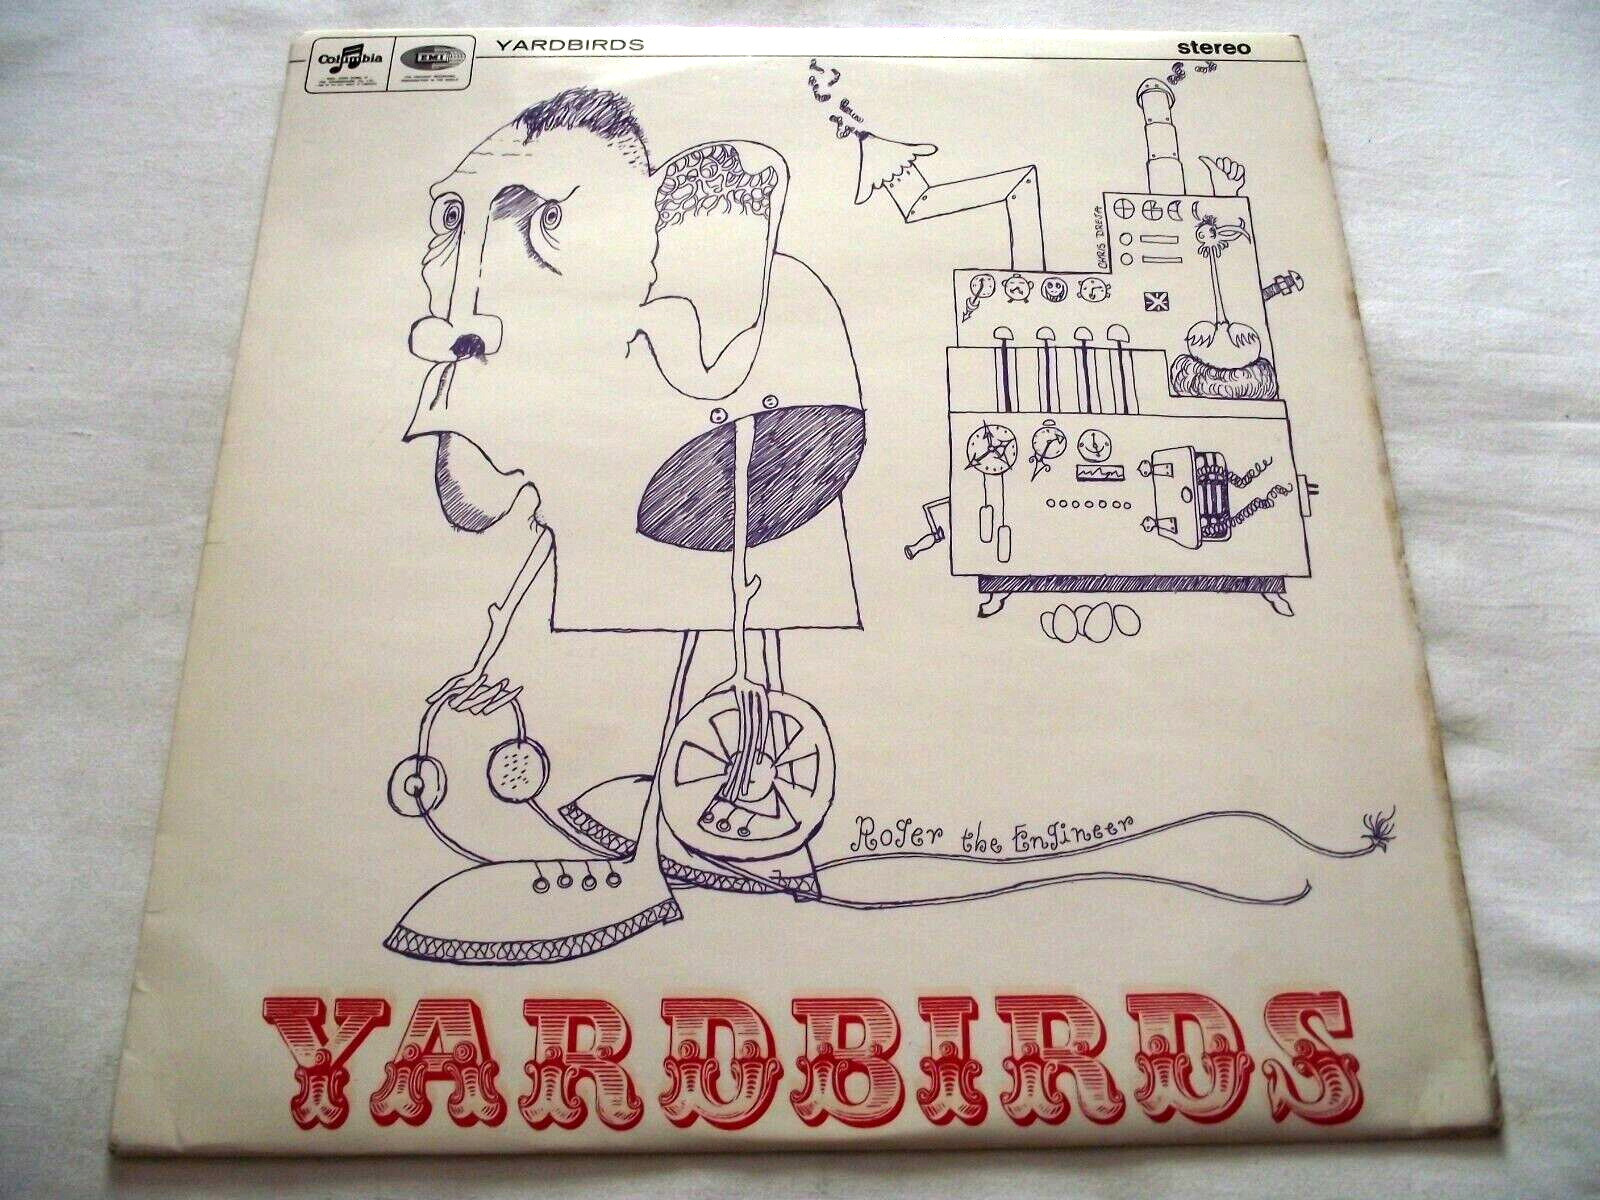 the-yardbirds-roger-the-engineer-1966-uk-1st-columbia-lp-stereo-lovely-ex